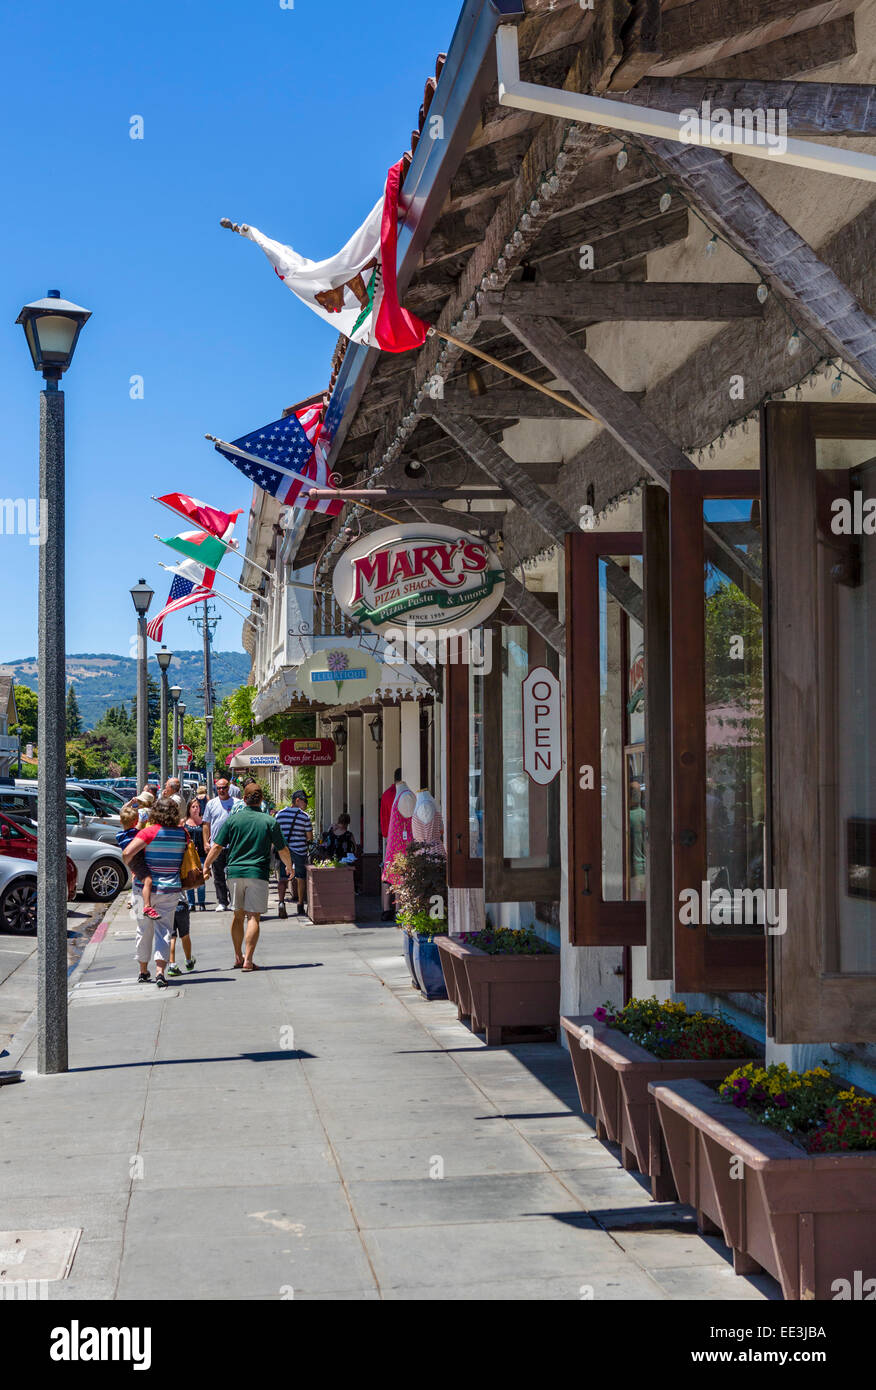 Shops along Spain Street in the Main Square, Sonoma, Sonoma Valley, Wine Country, California, USA Stock Photo